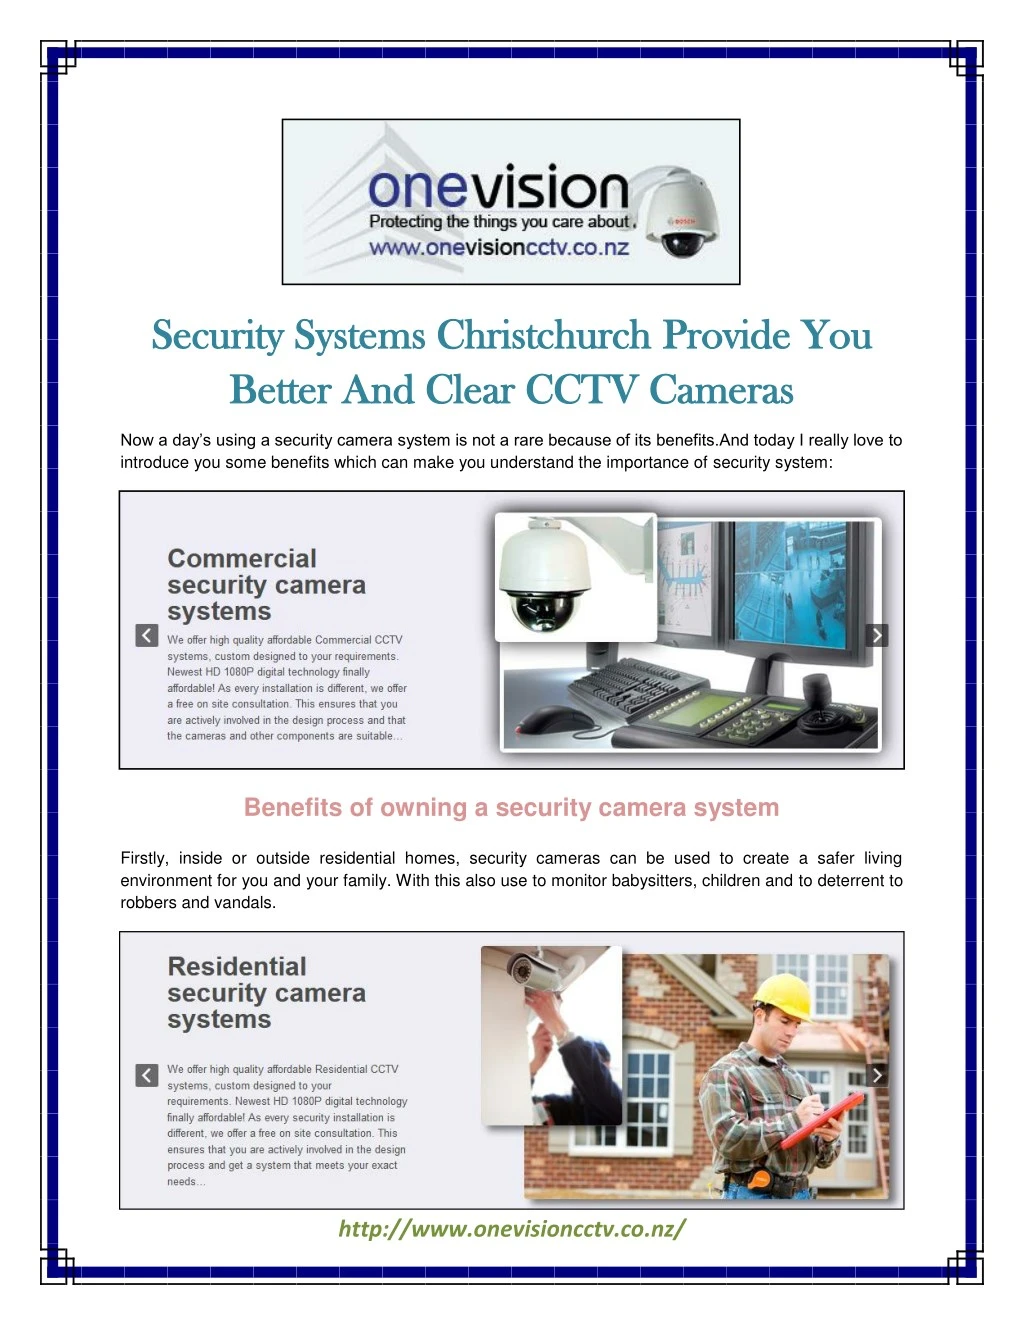 security systems christchurch security systems